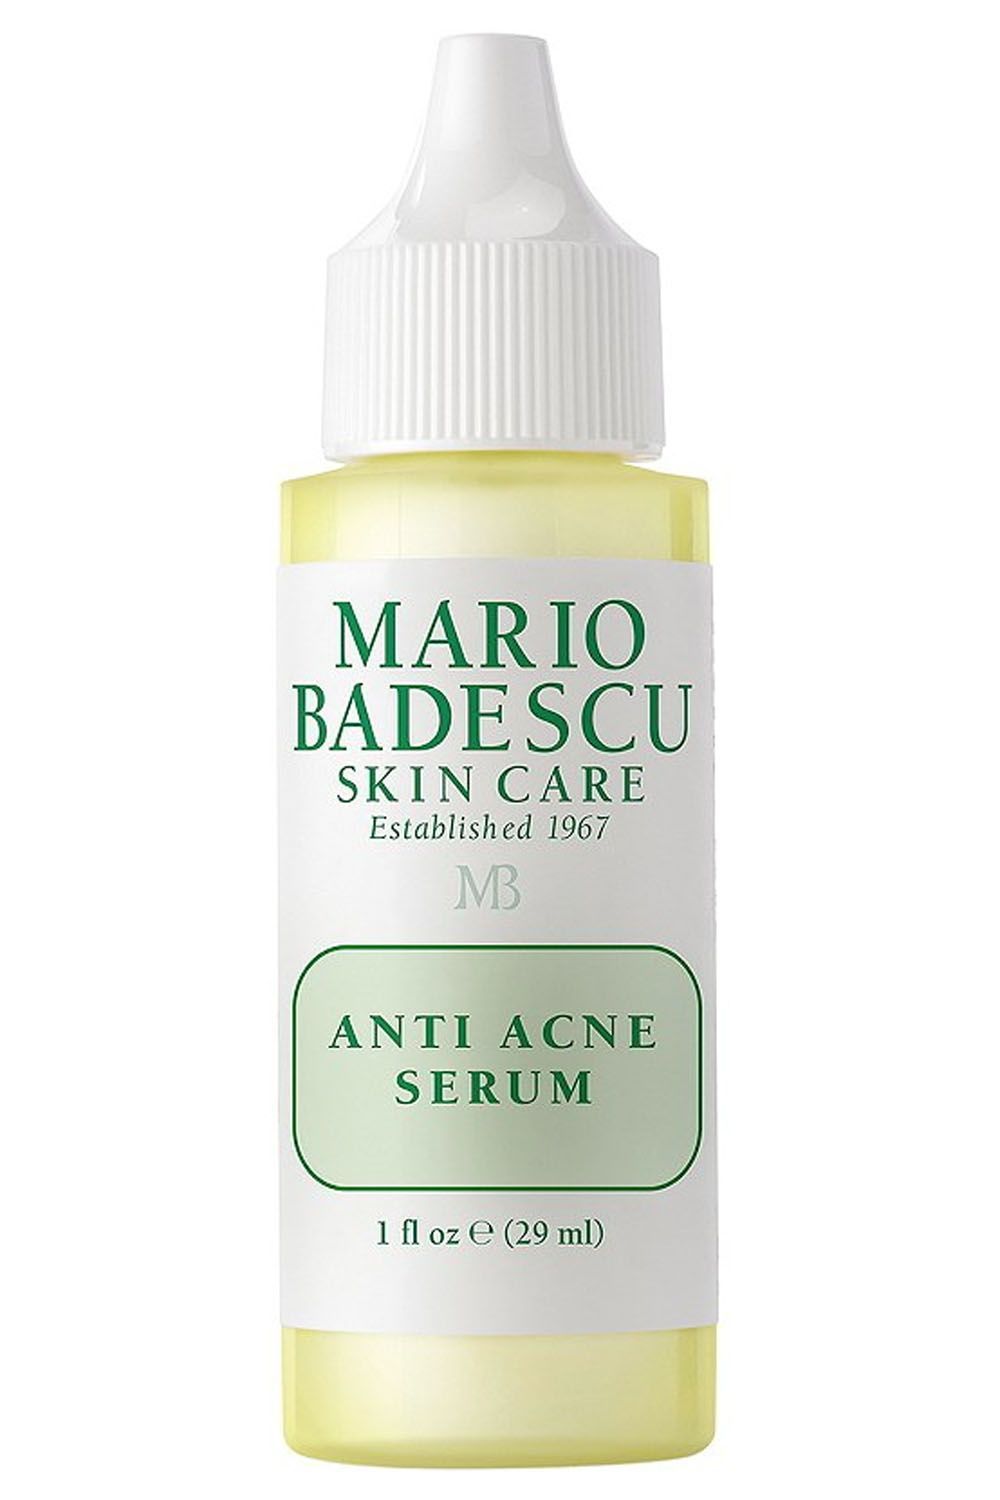 10 Best Acne Serums Of 2020 For Breakouts And Blackheads